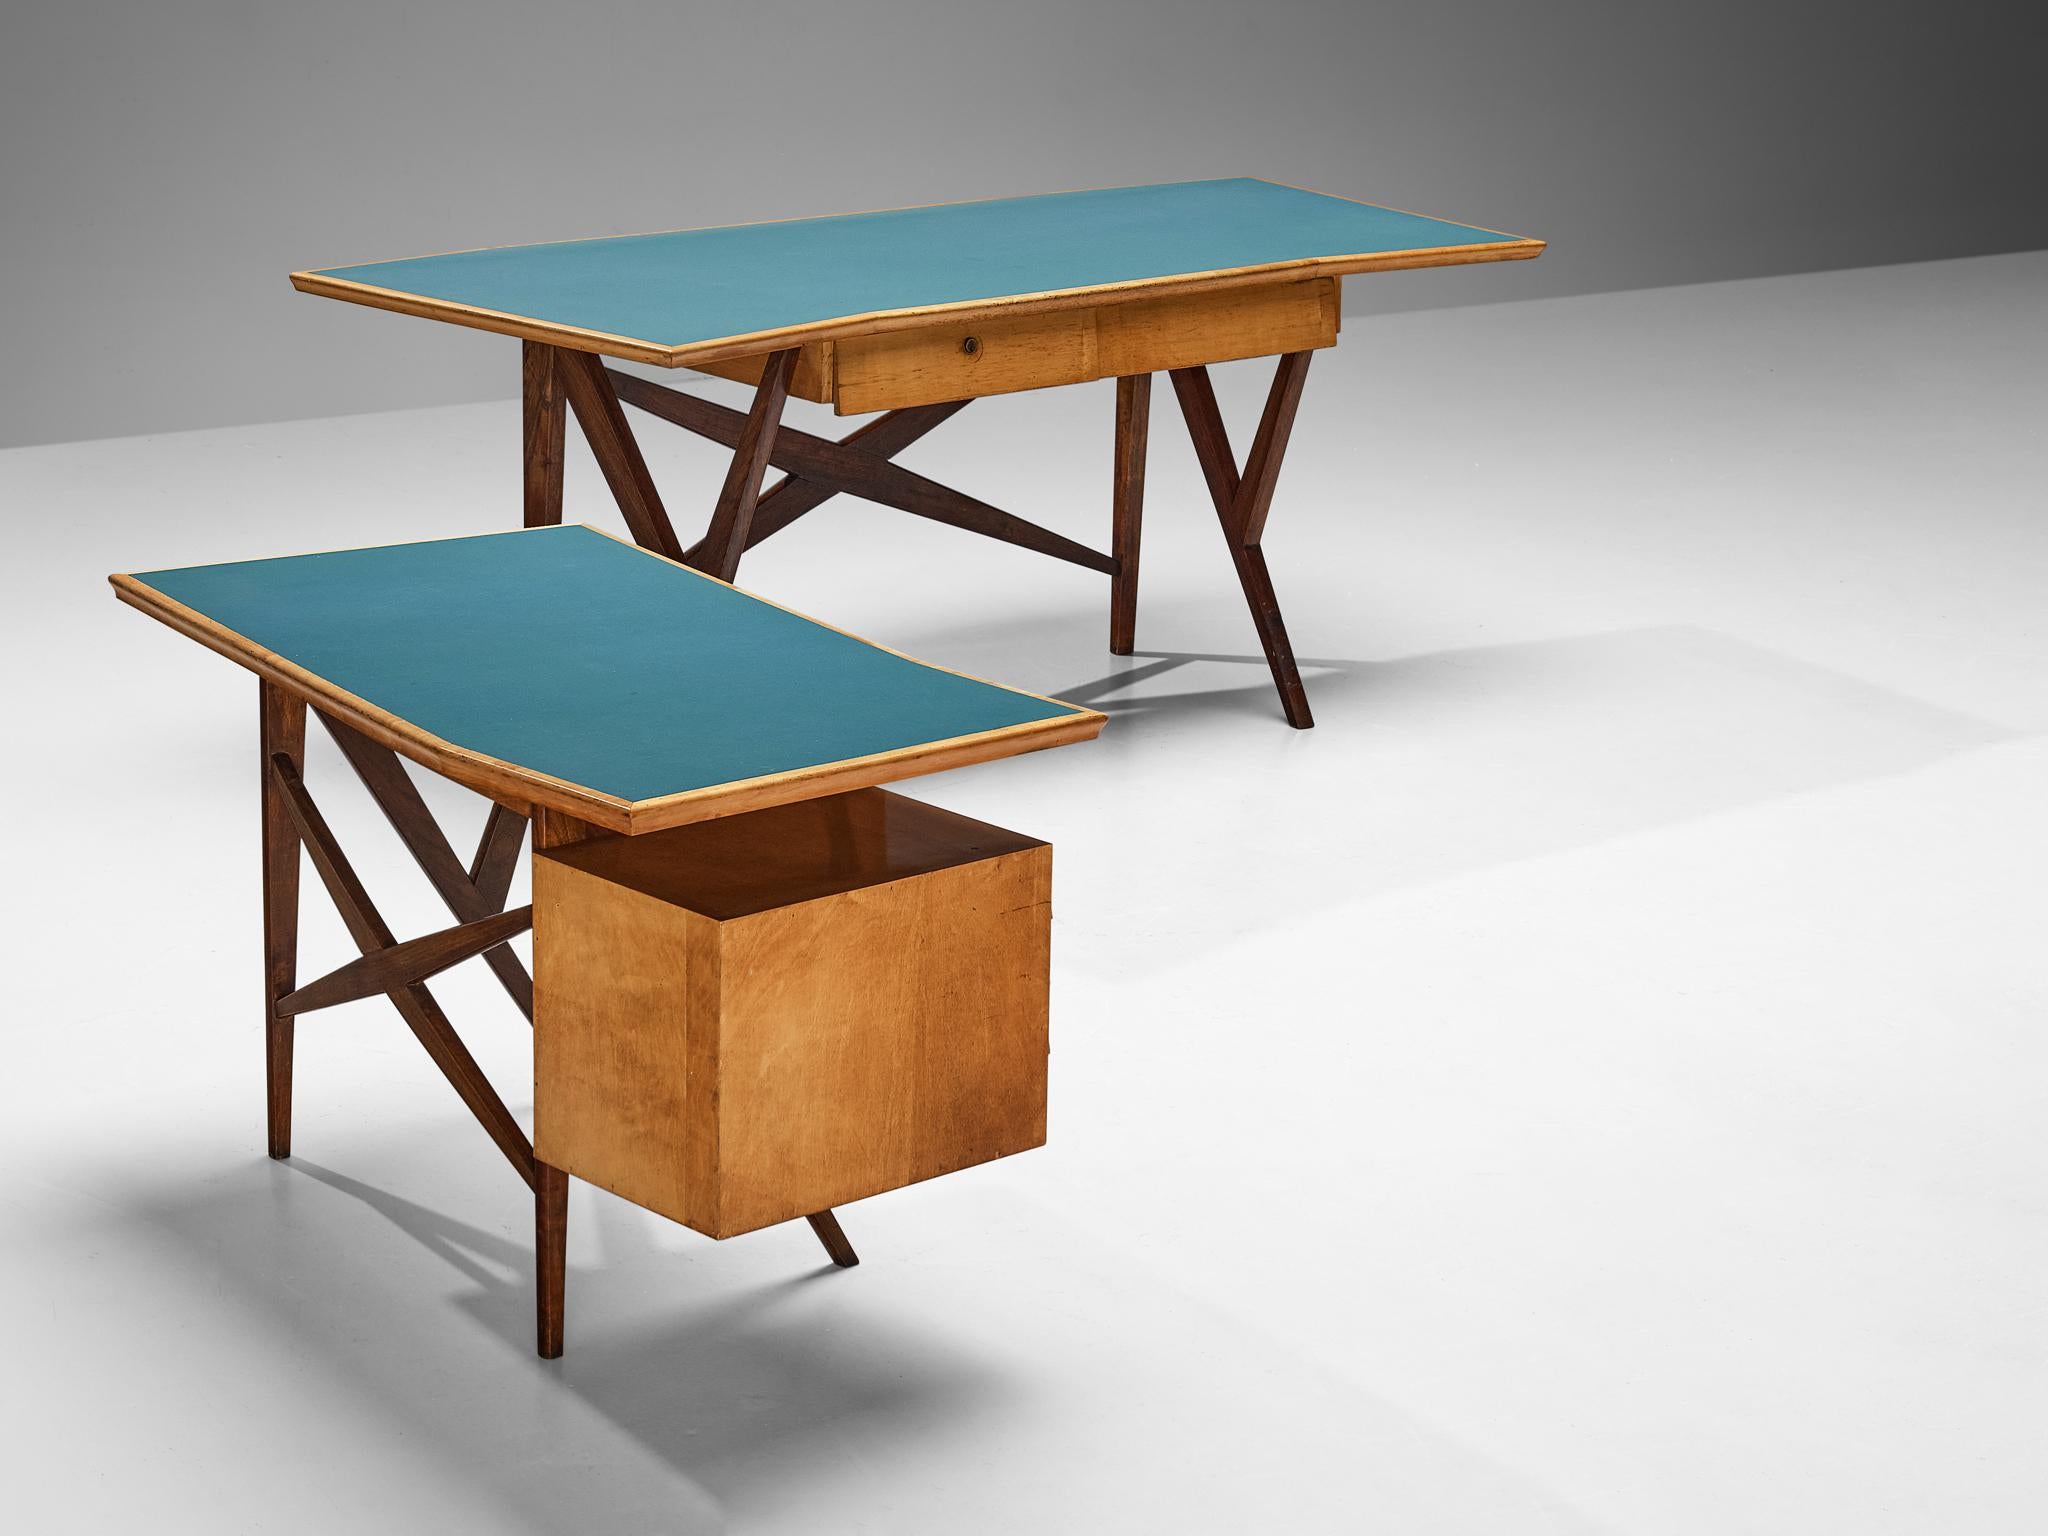 Gustavo & Vito Latis, desk with a return, mahogany, maple, formica, Italy, circa 1960

Made in Italy, this writing desk with return is a testament to the design ethos prevalent in the mid-20th century, particularly during the 1950s and 1960s. Made